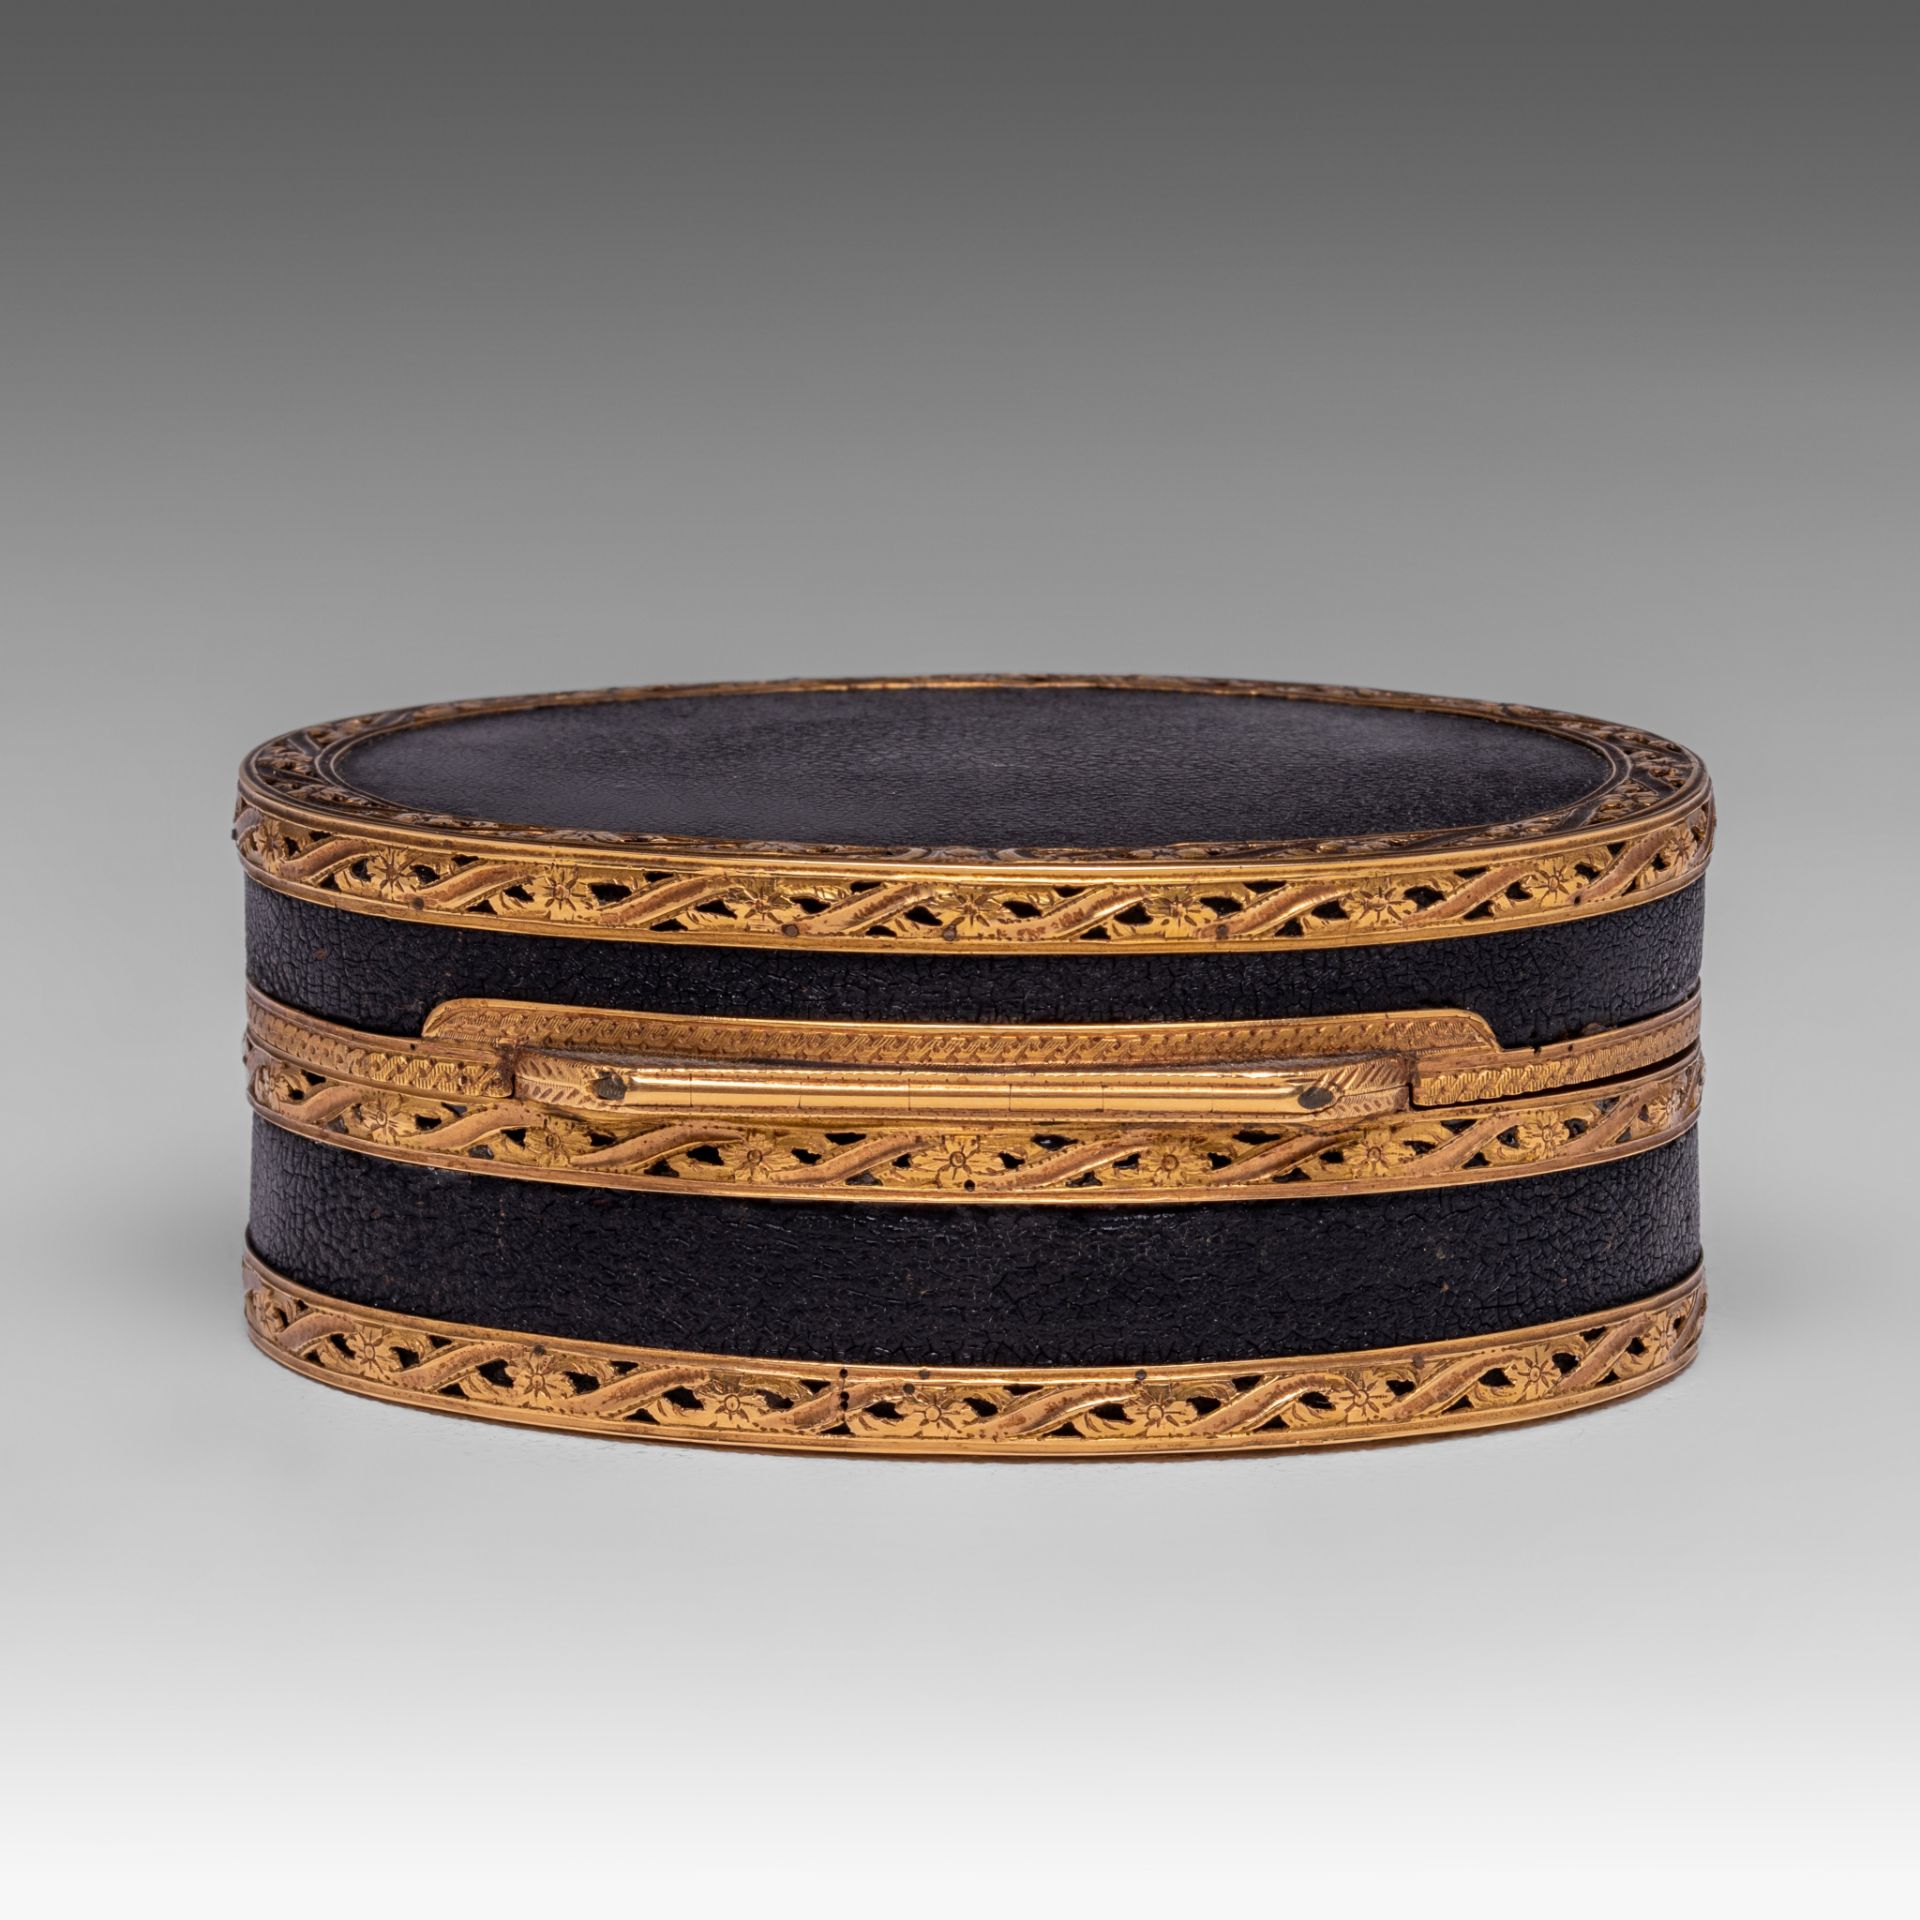 A fine Louis XVI leather and gold snuffbox, the inside with tortoiseshell, late 18thC, H 3,5 cm - Image 5 of 7